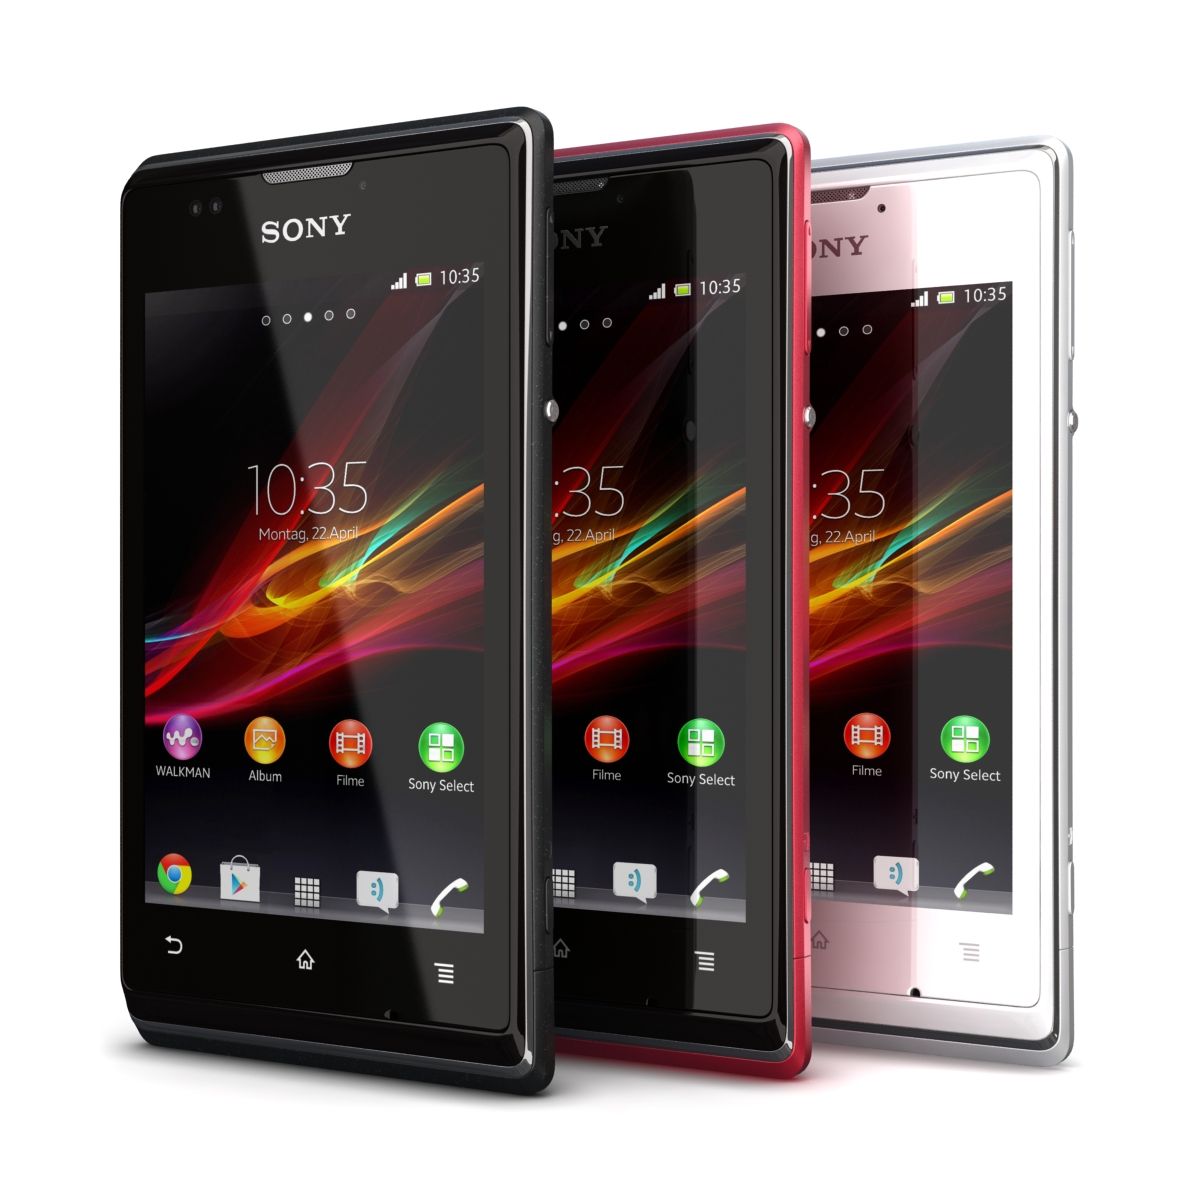 Activating Unlocked Sony Xperia E C1504: Step-by-Step